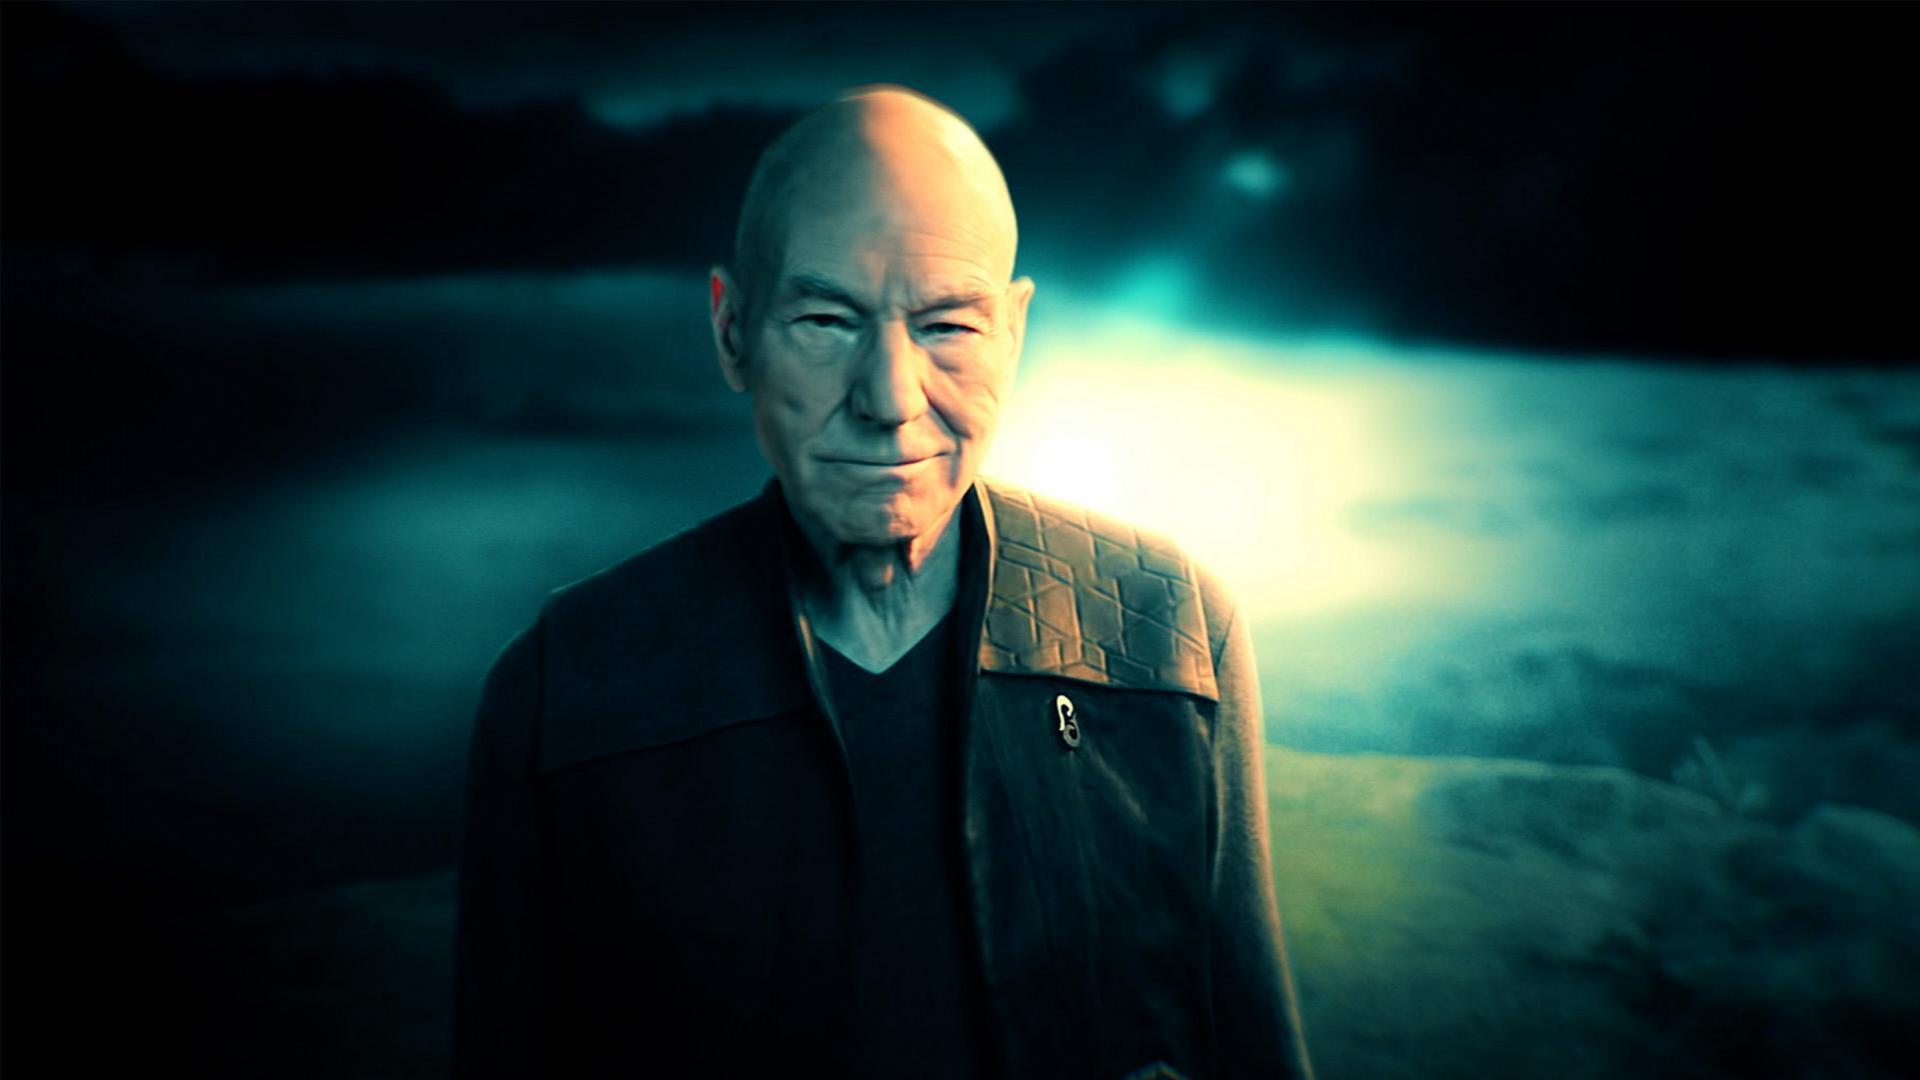 Star Trek: Picard Shows off New Image, Video